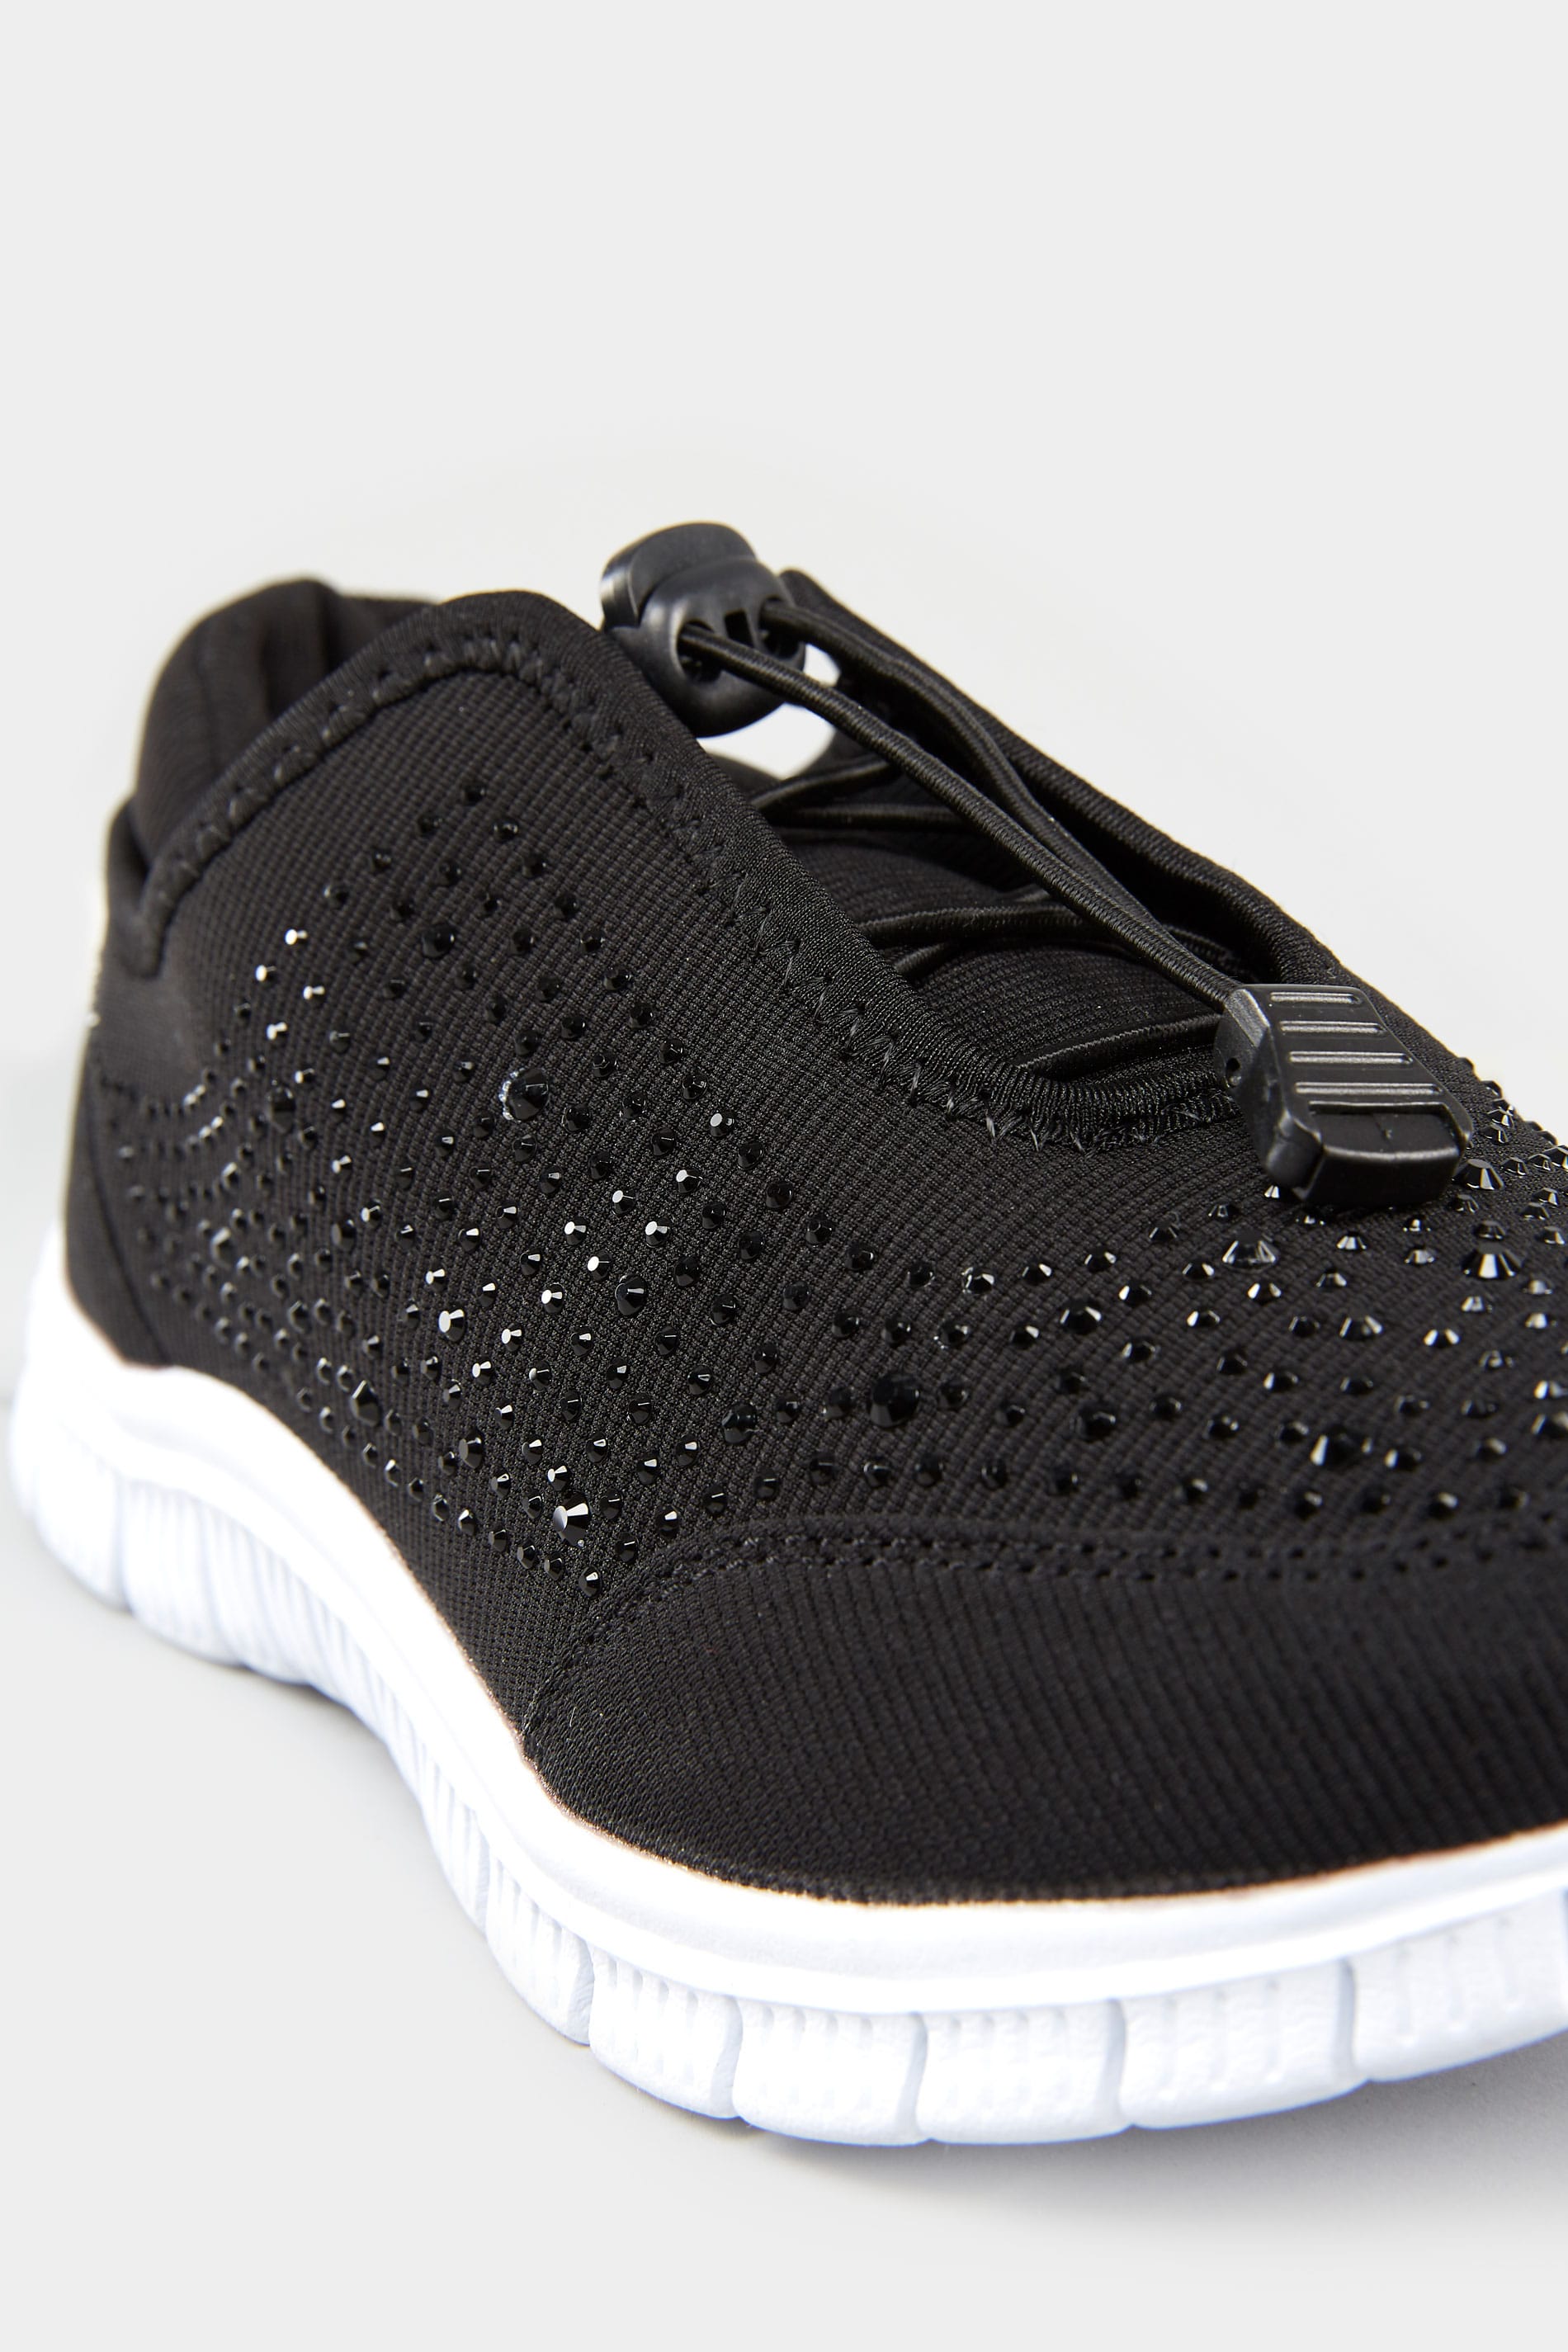 Chaussures Pieds Larges Tennis & Baskets Pieds Larges | Baskets Noires avec Strass Pieds Larges EEE - JW46326